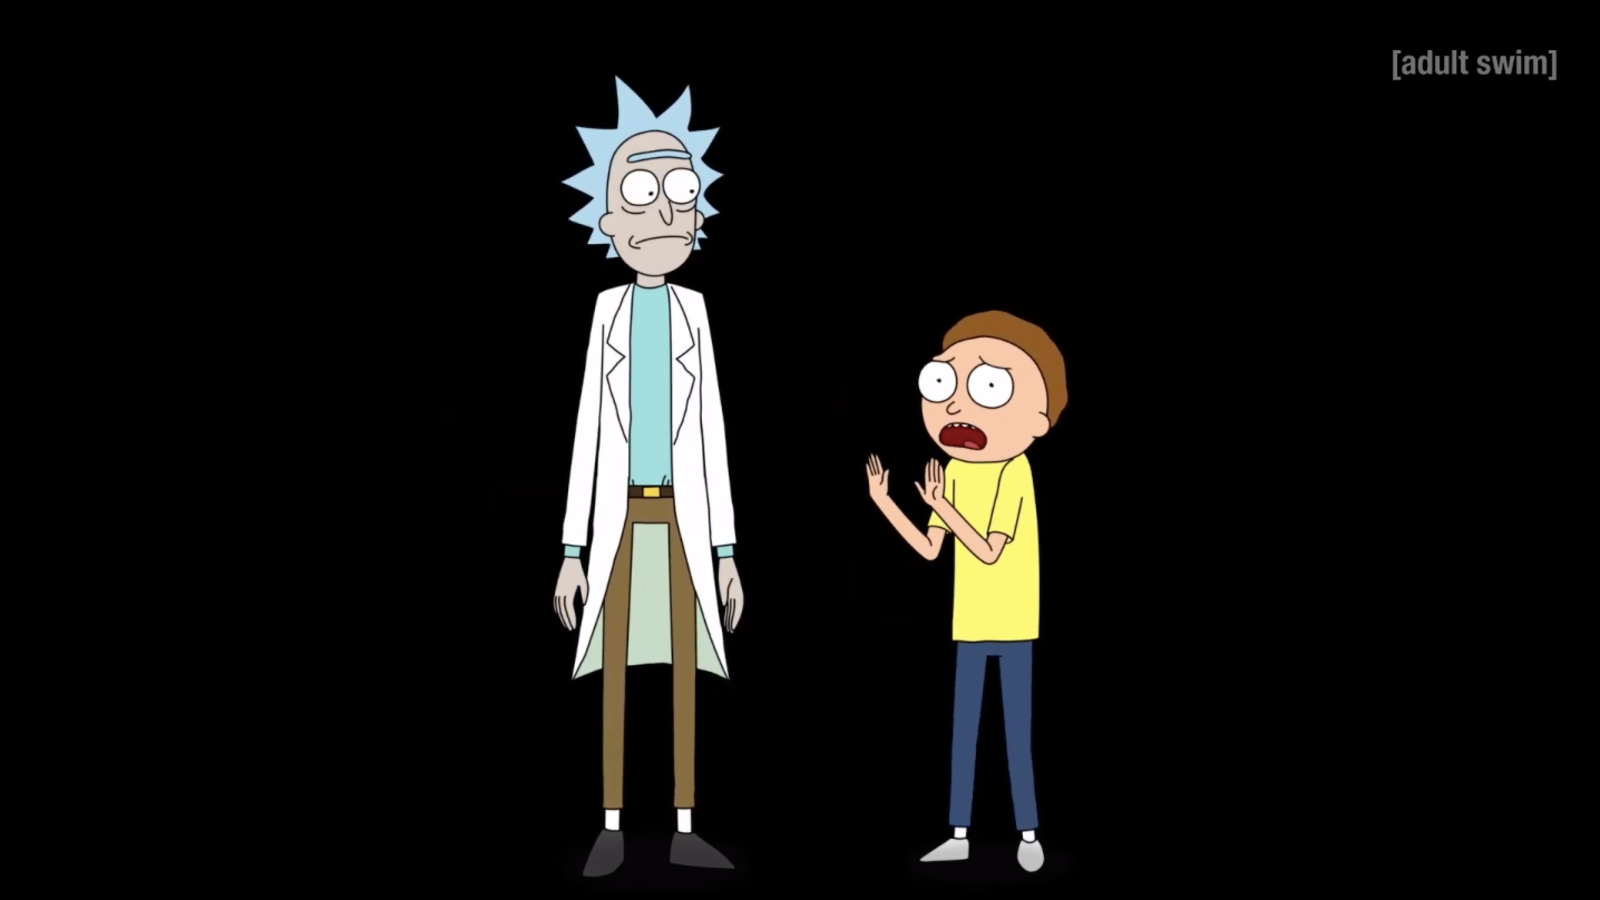 Rick Morty Season 4 Release Date And Morty